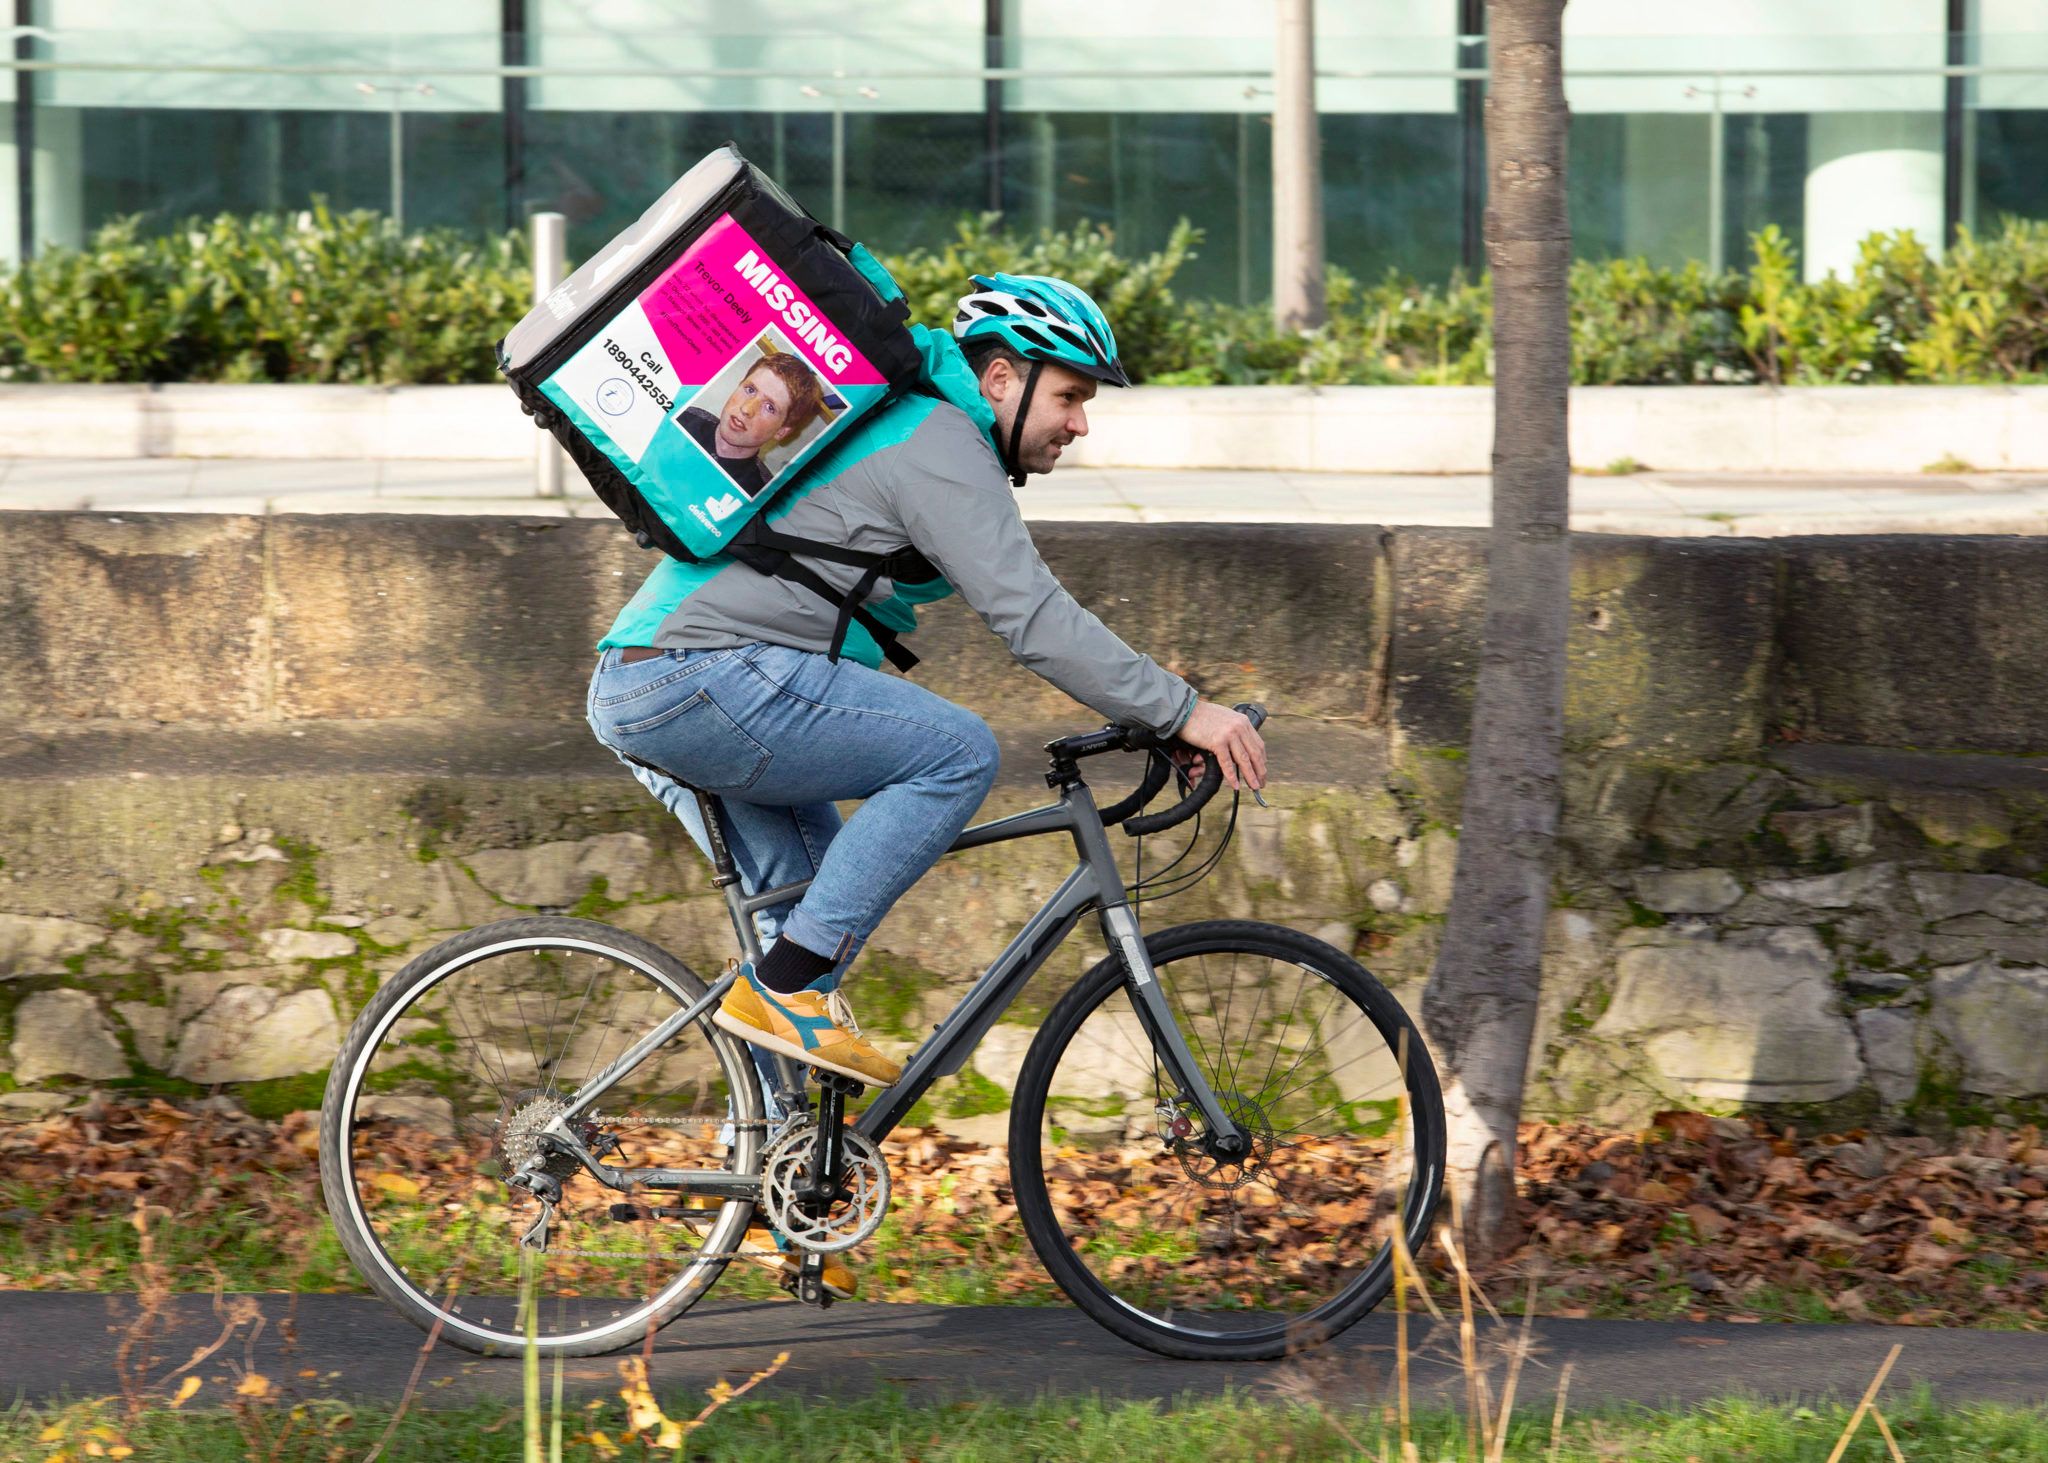 Photos of missing people to appear on Deliveroo riders' bags this month